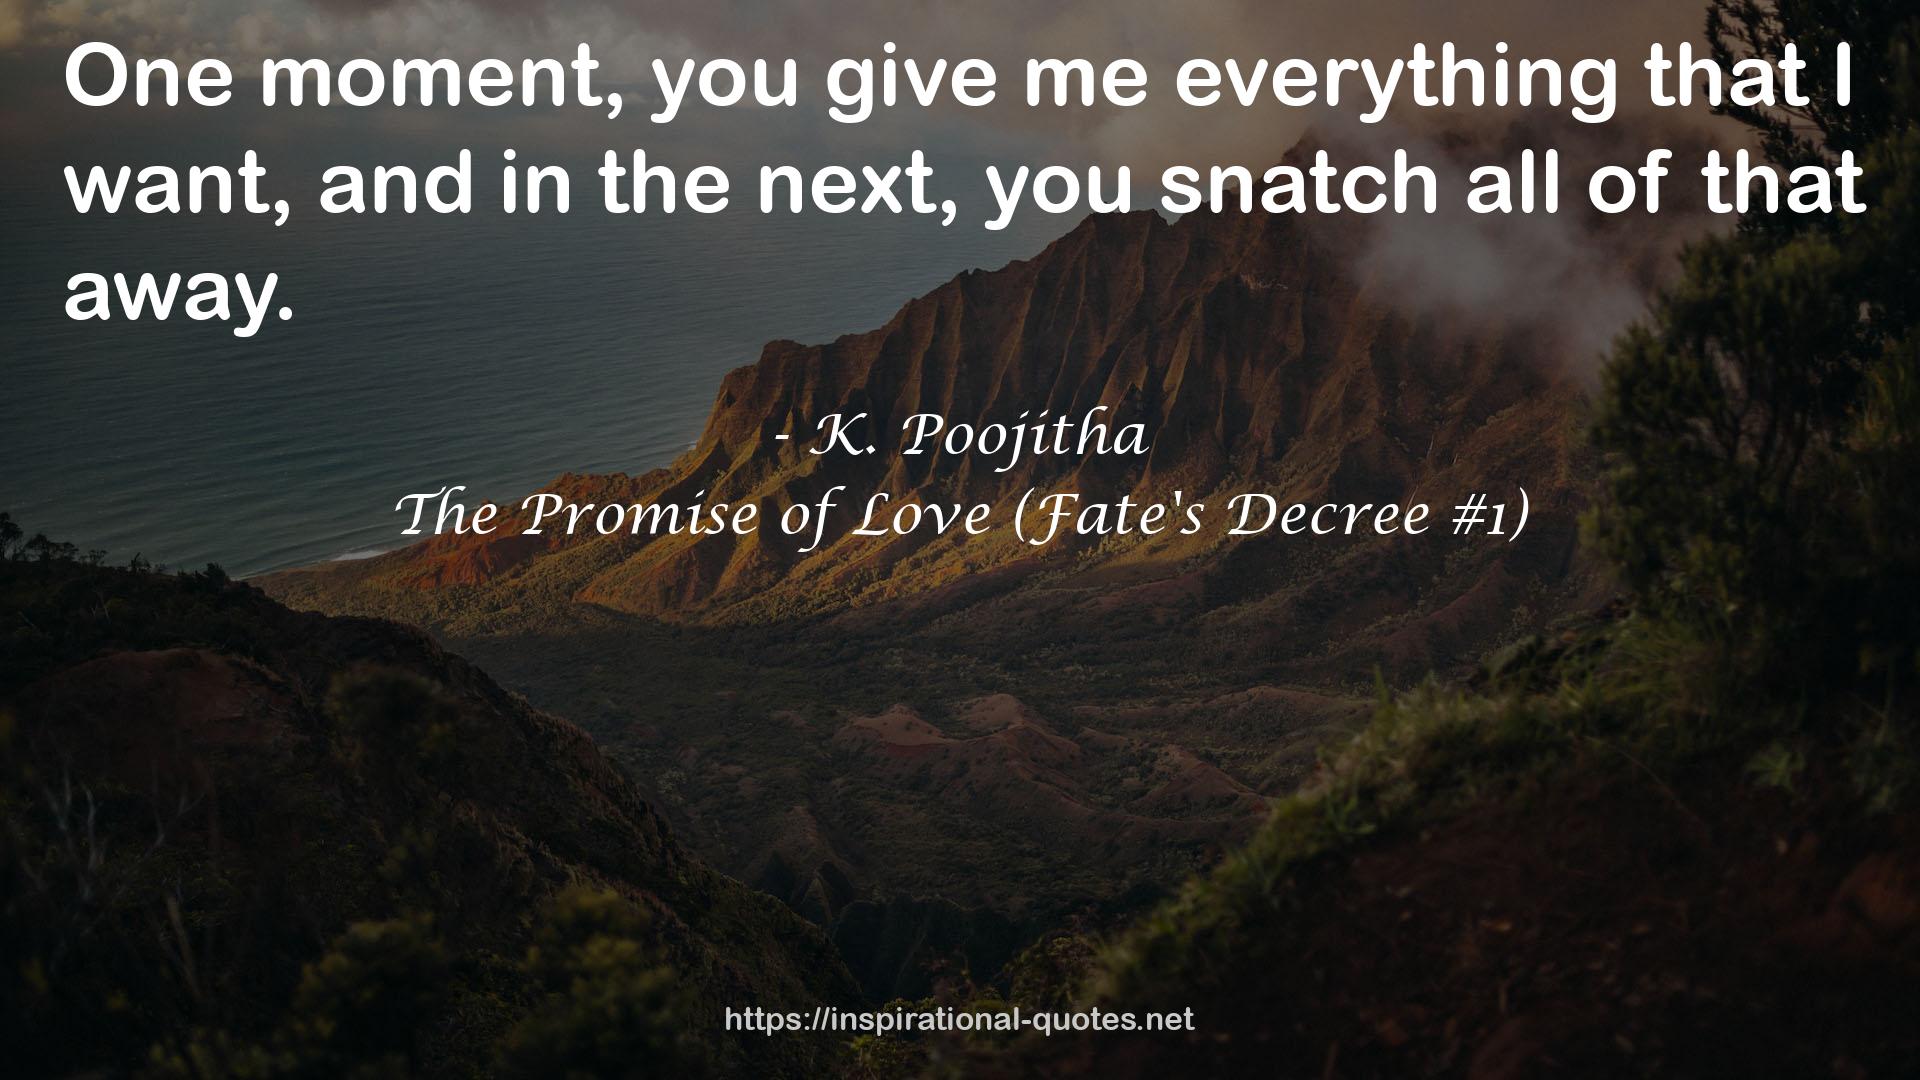 The Promise of Love (Fate's Decree #1) QUOTES